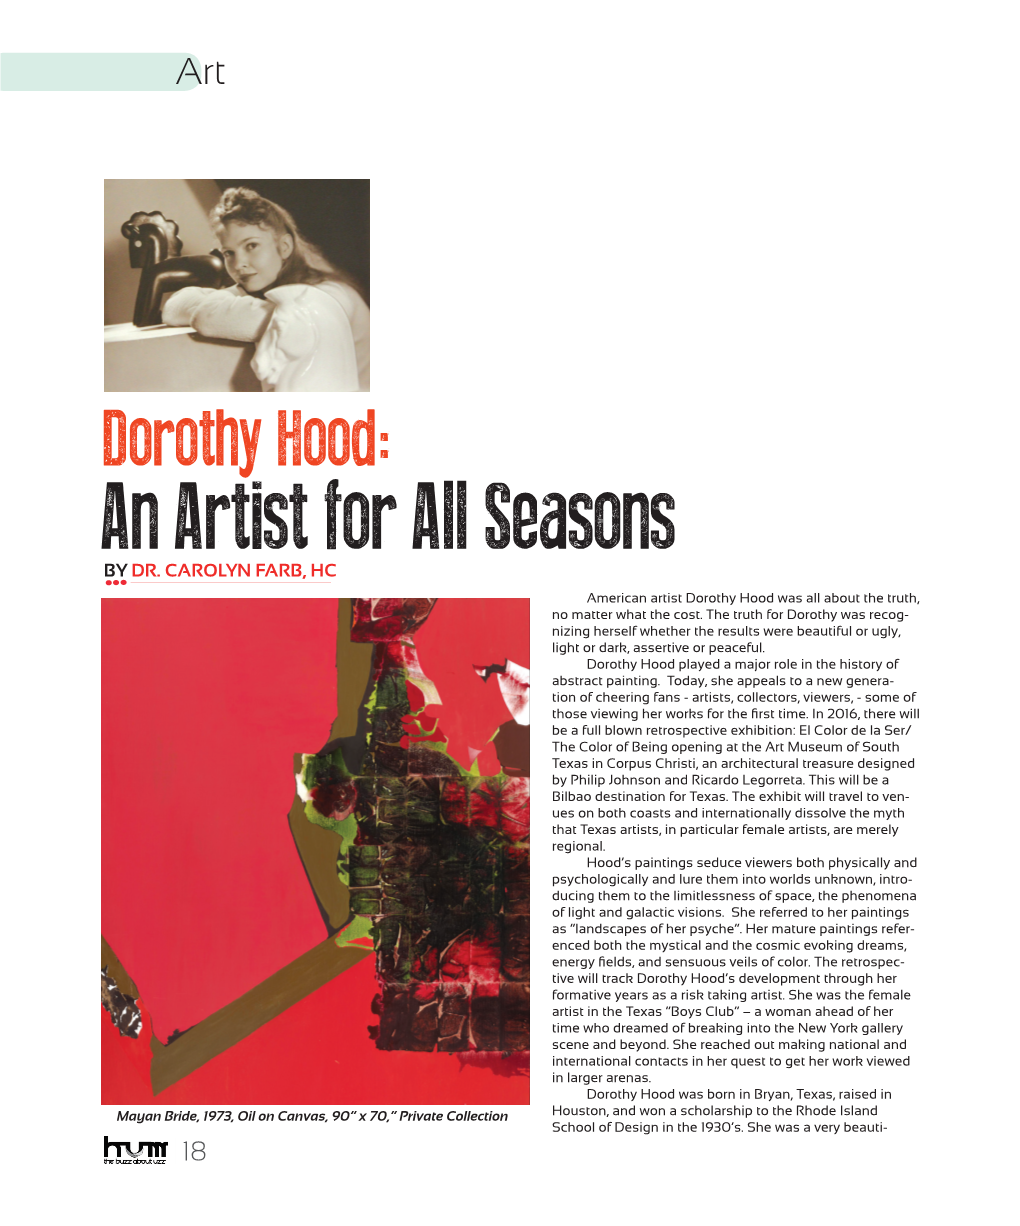 An Artist for All Seasons by DR